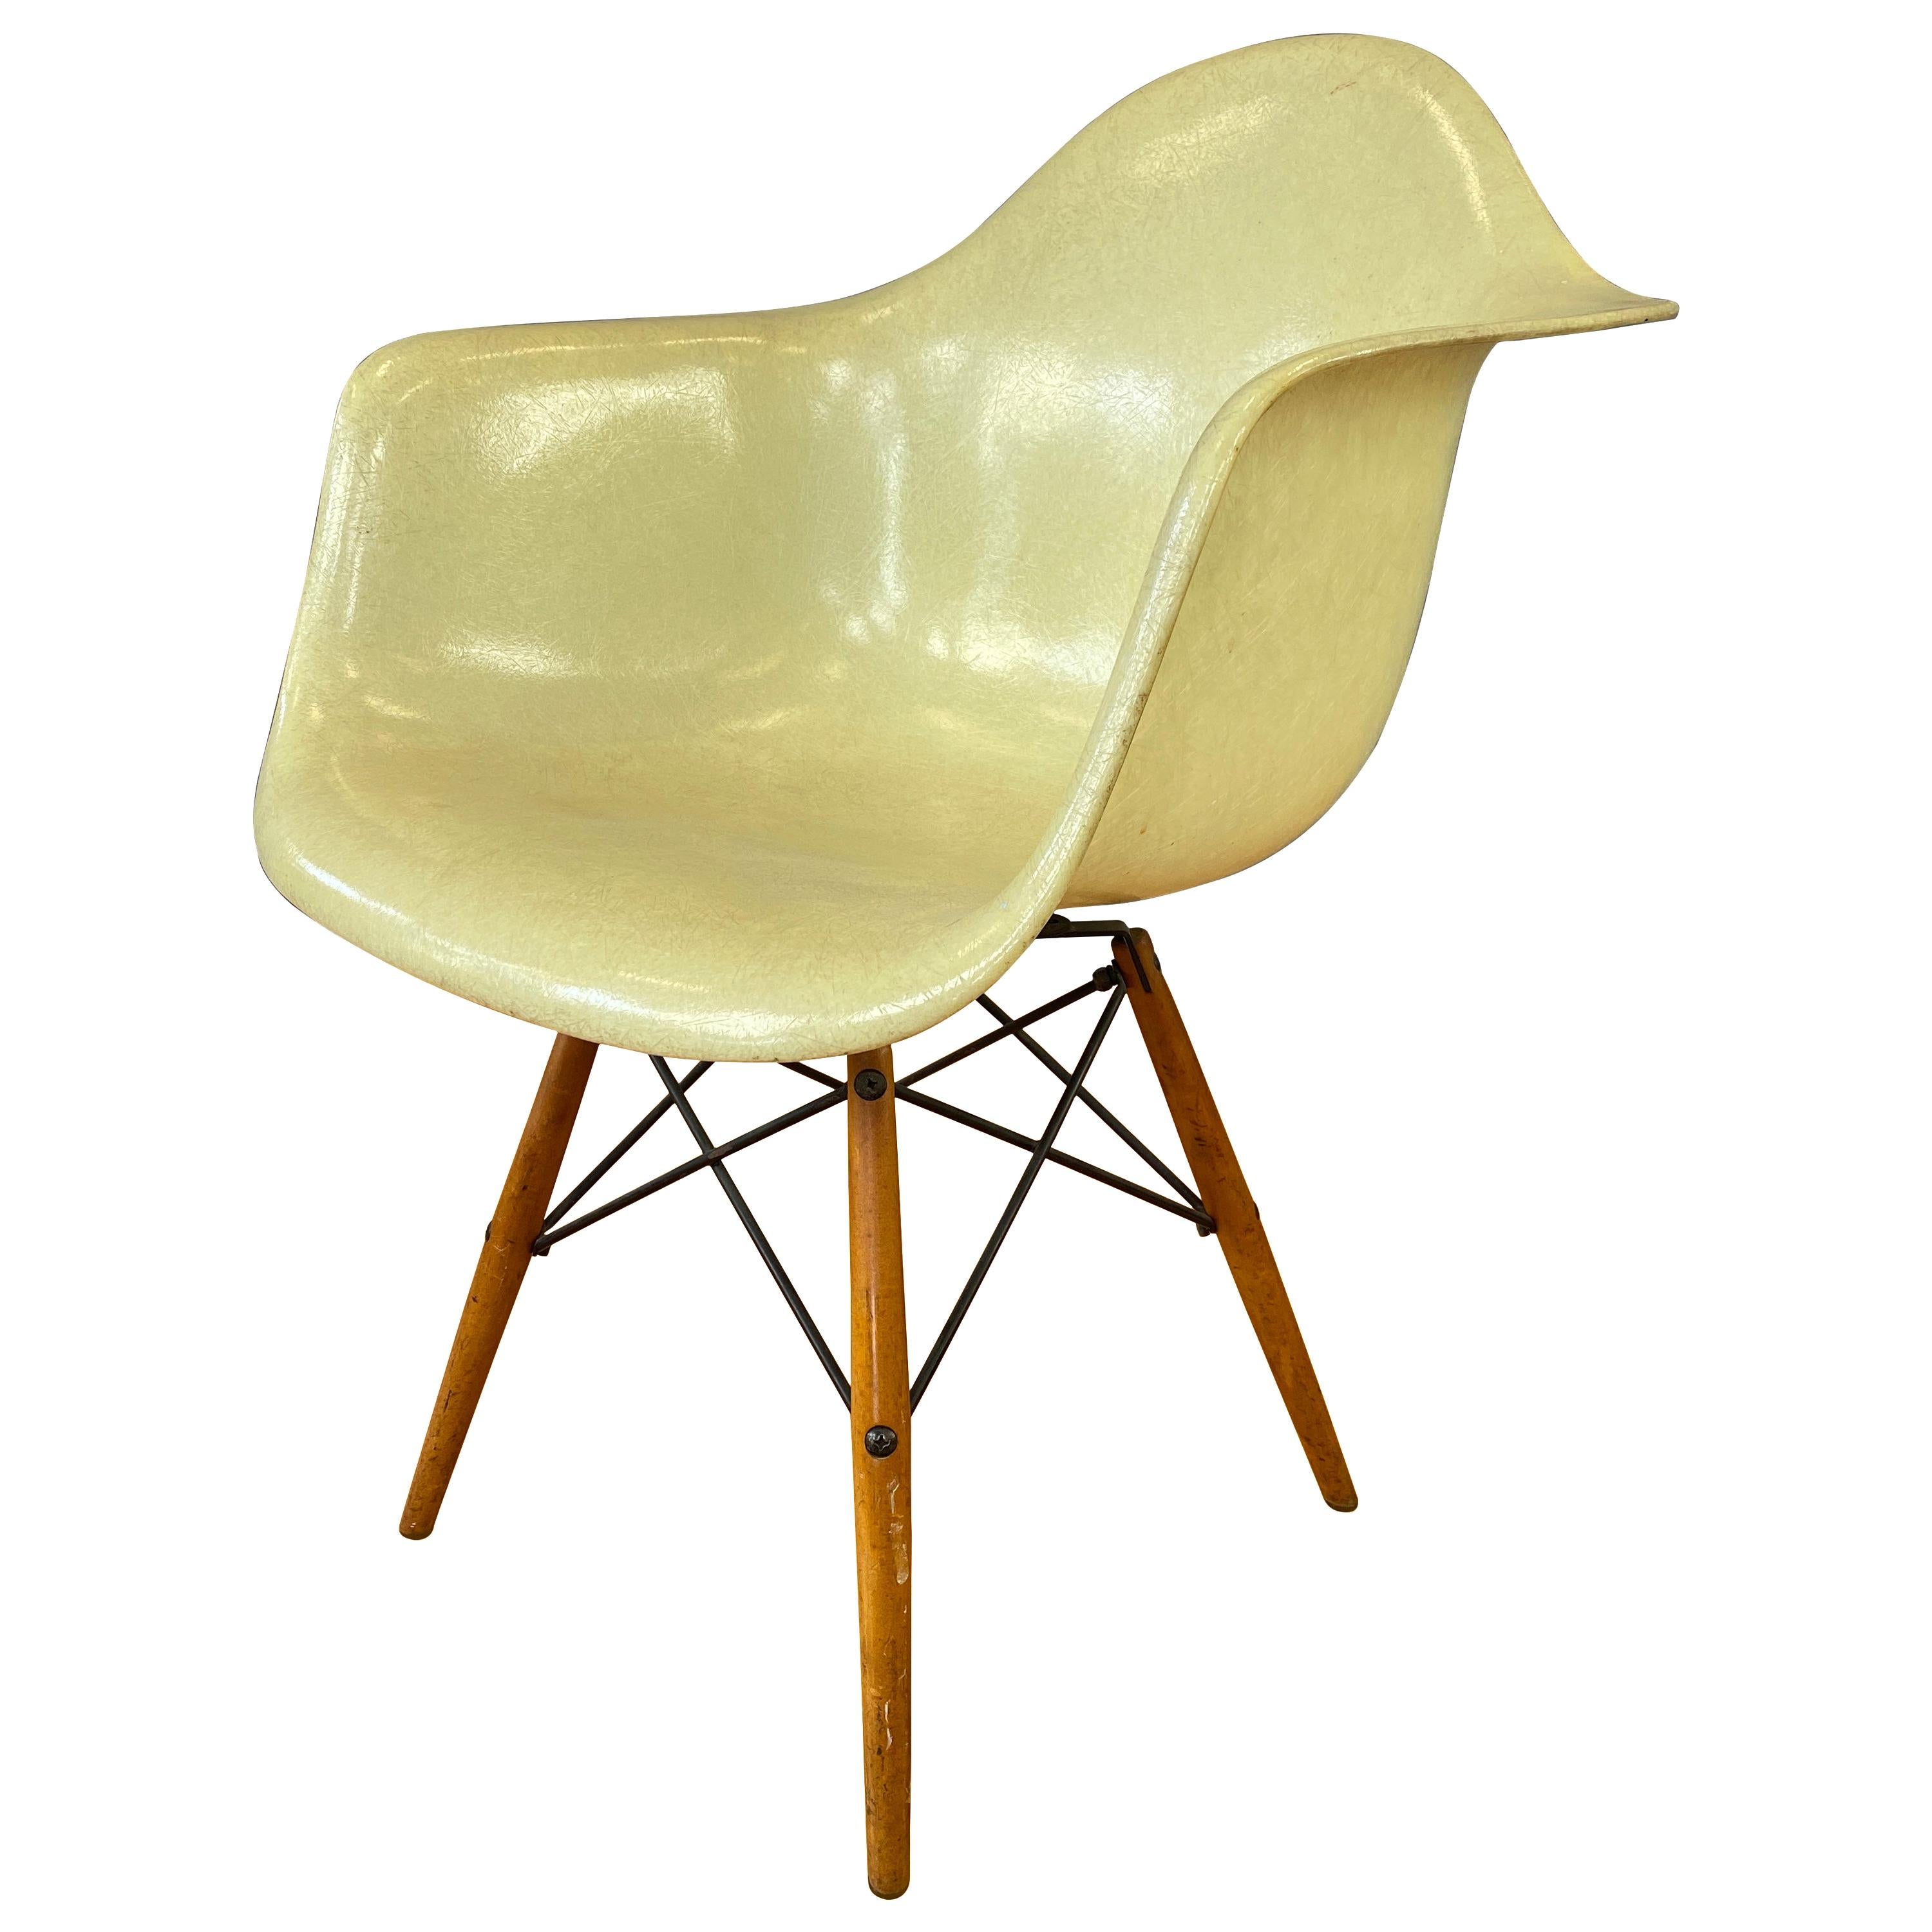 1st Edition Zenith Plastics Rope Edge Paw Chair Charles Eames for Herman Miller